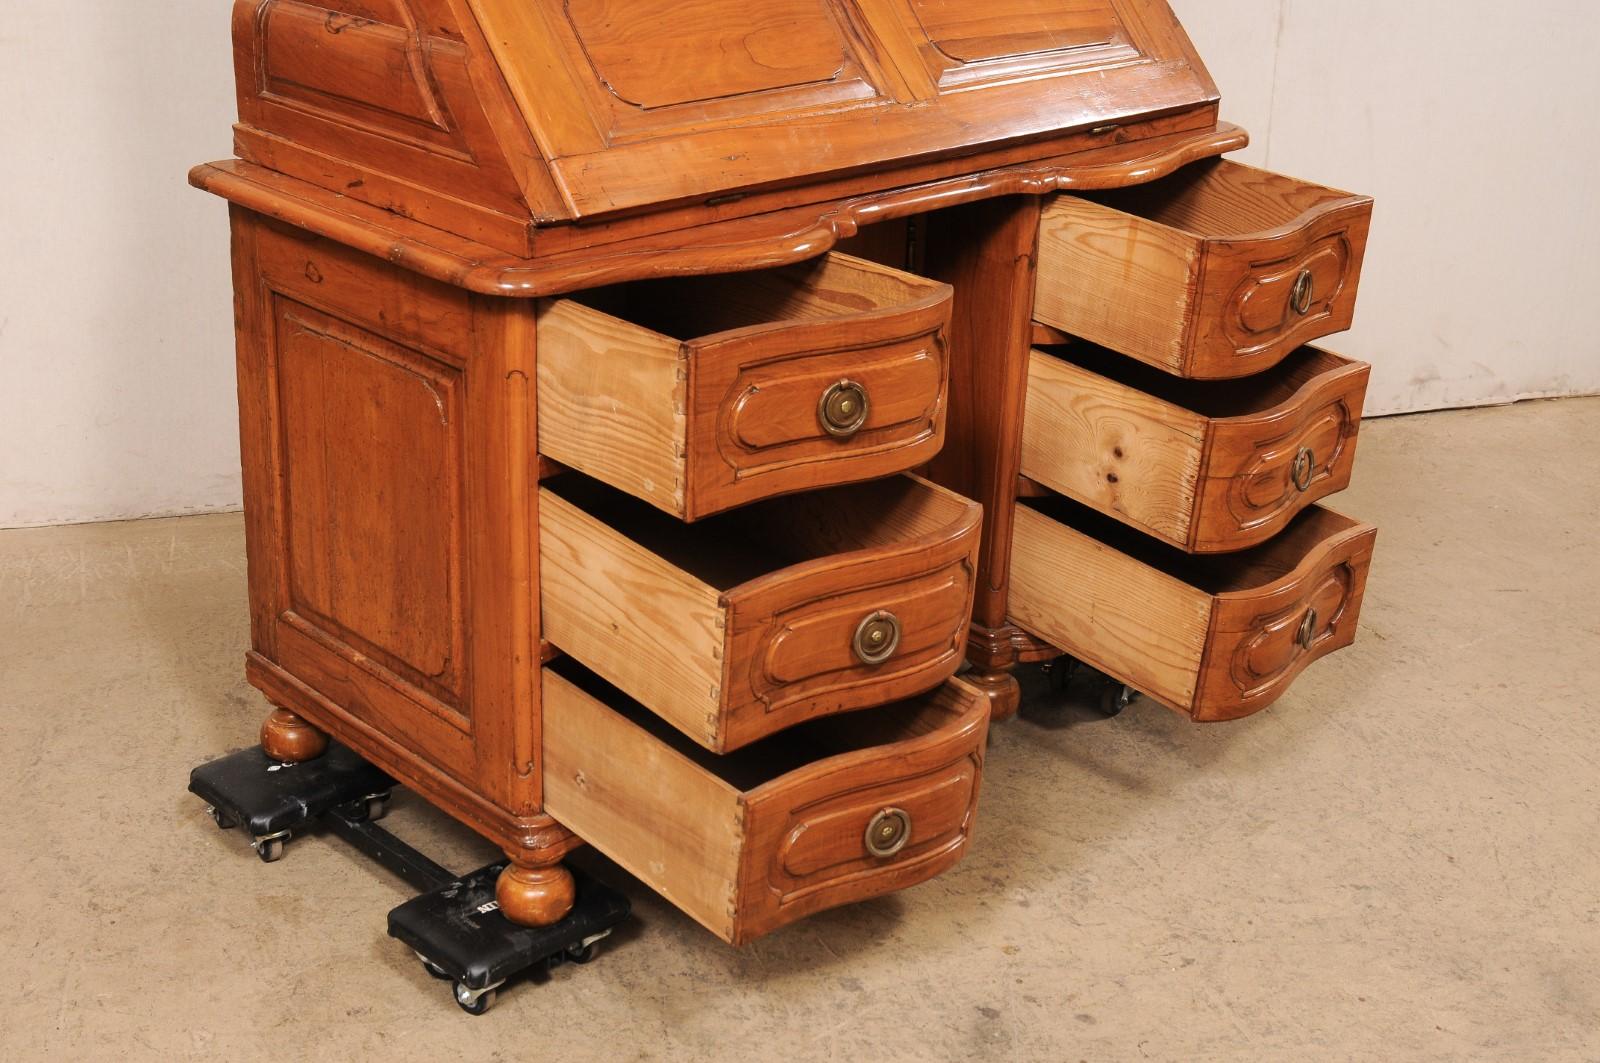 Wood 18th C. French Louis XVI Tall Secretaire (Retains Original Leather on Desk-Top) For Sale